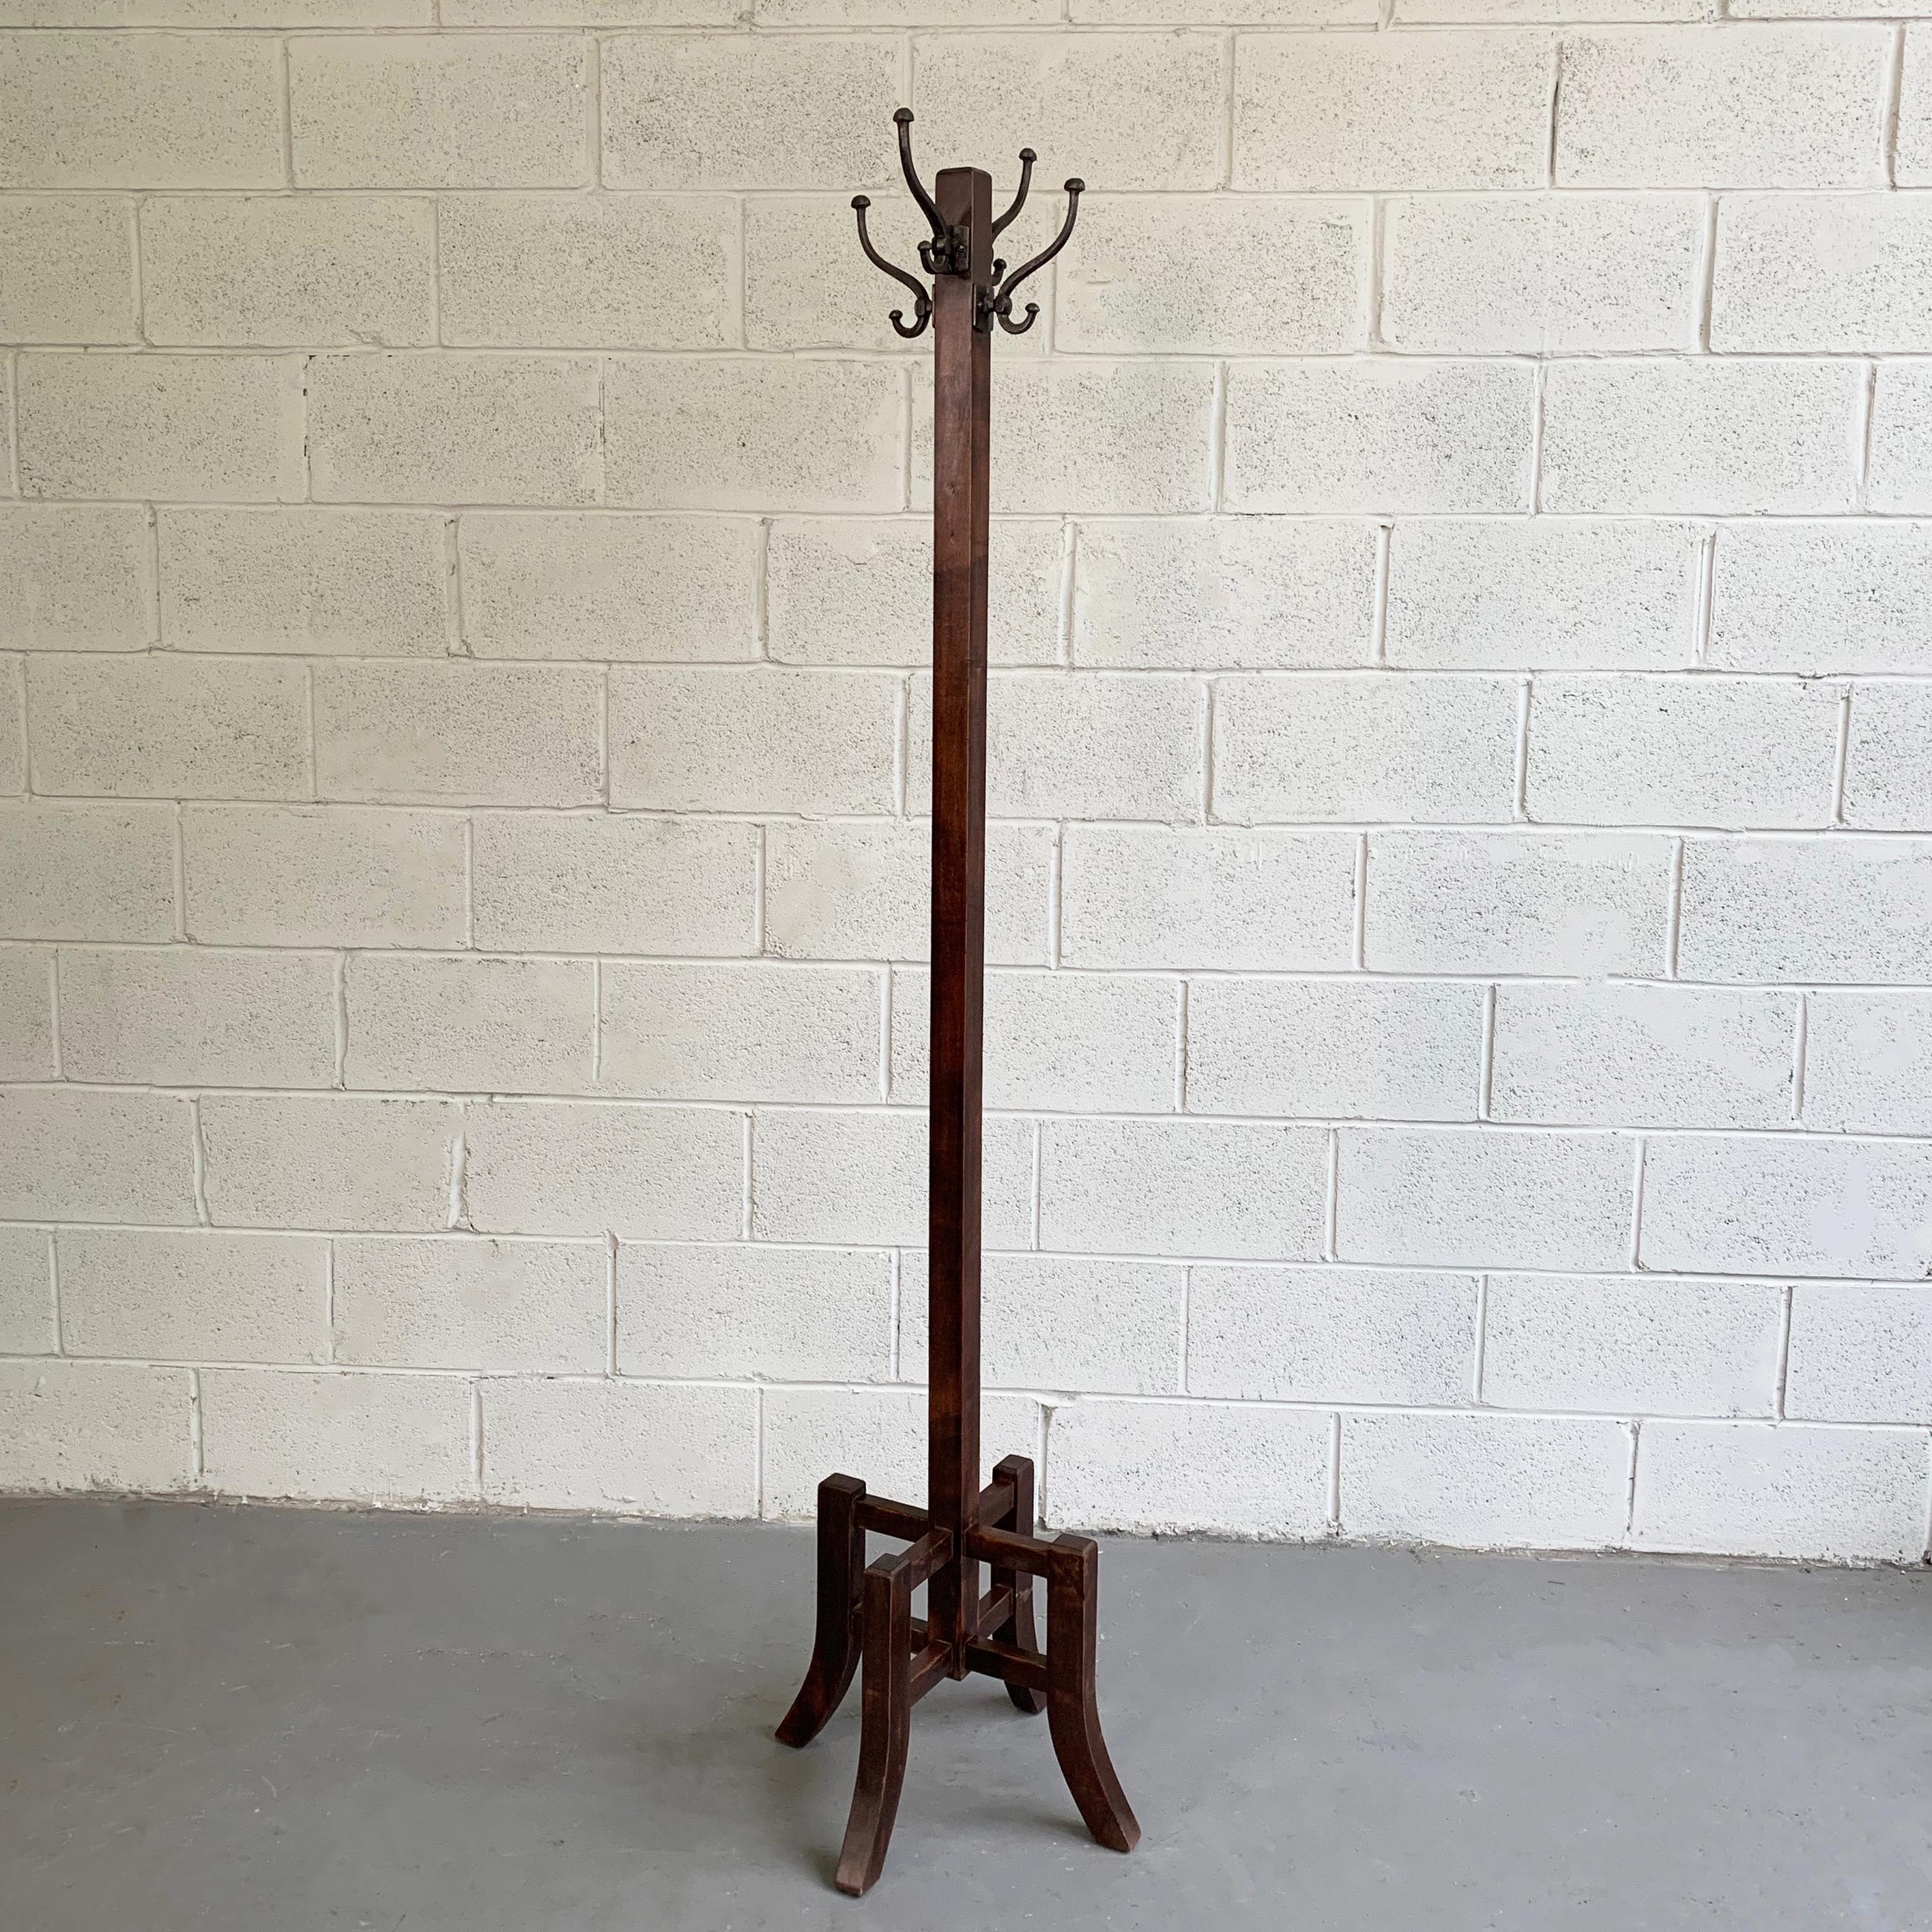 Early 20th century, Arts & Crafts, standing coat rack features a stained maple Stand with decorative base and 4 cast iron double hooks.